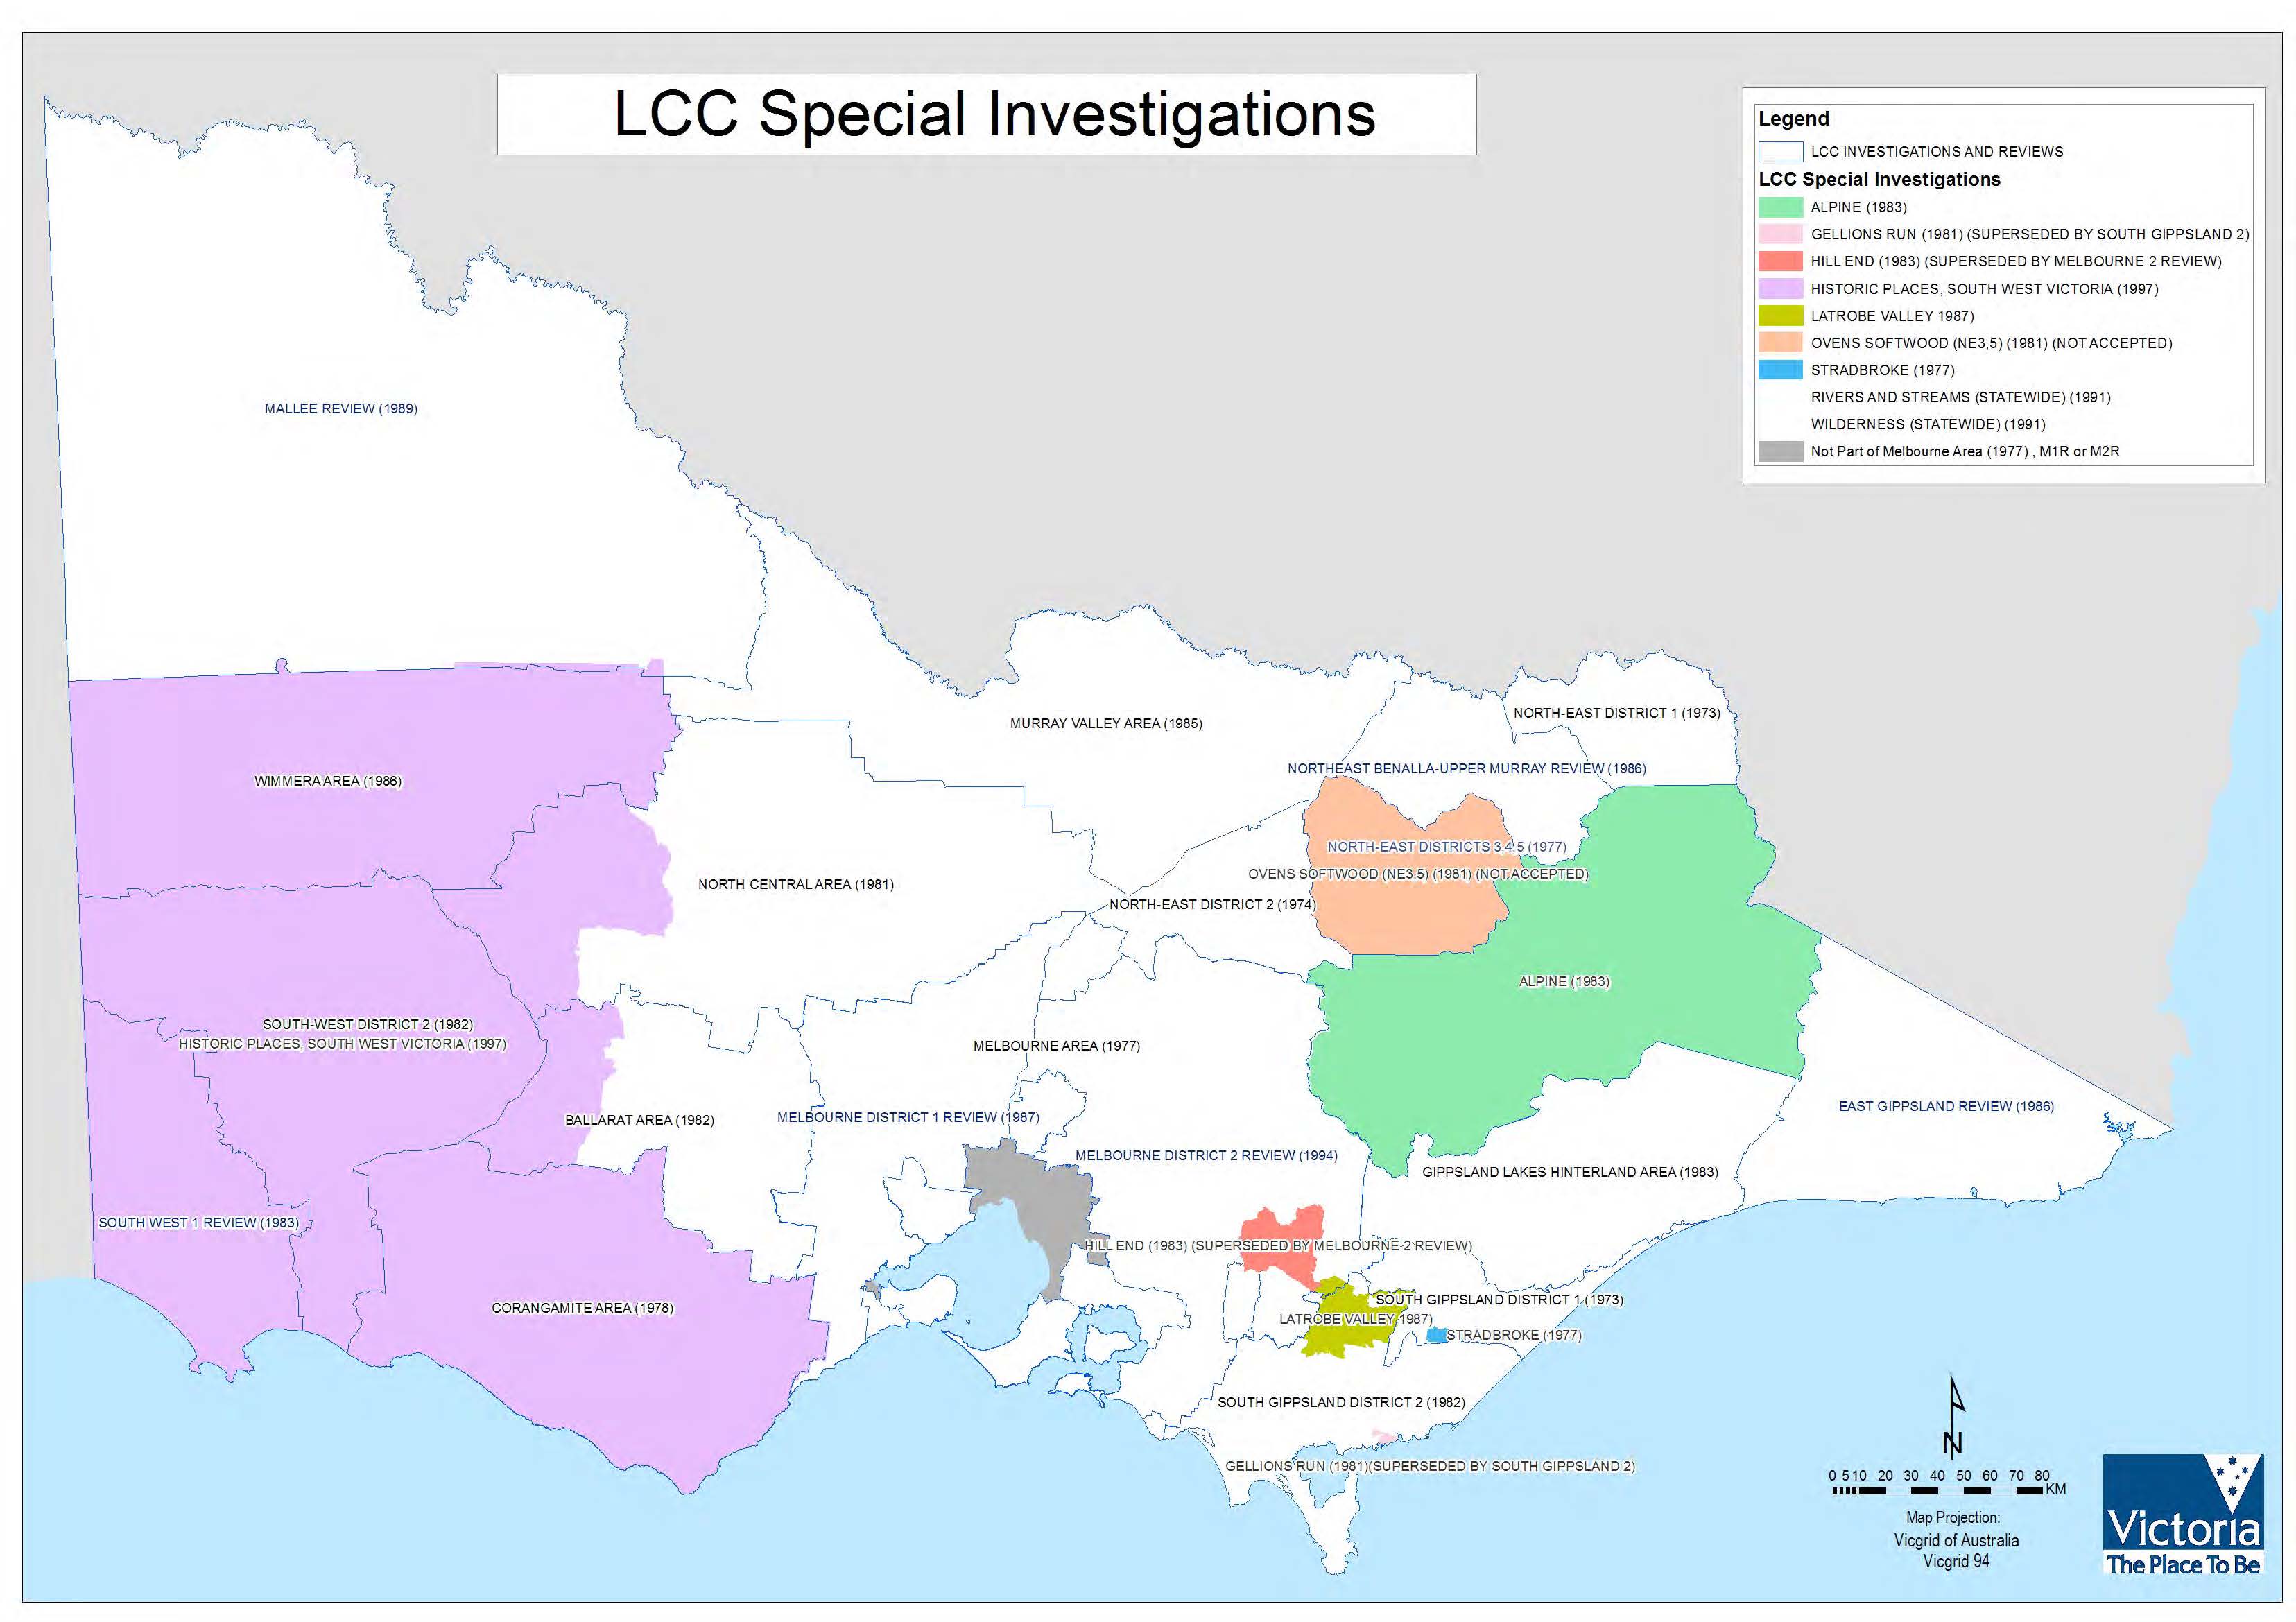 Map of LCC special investigations